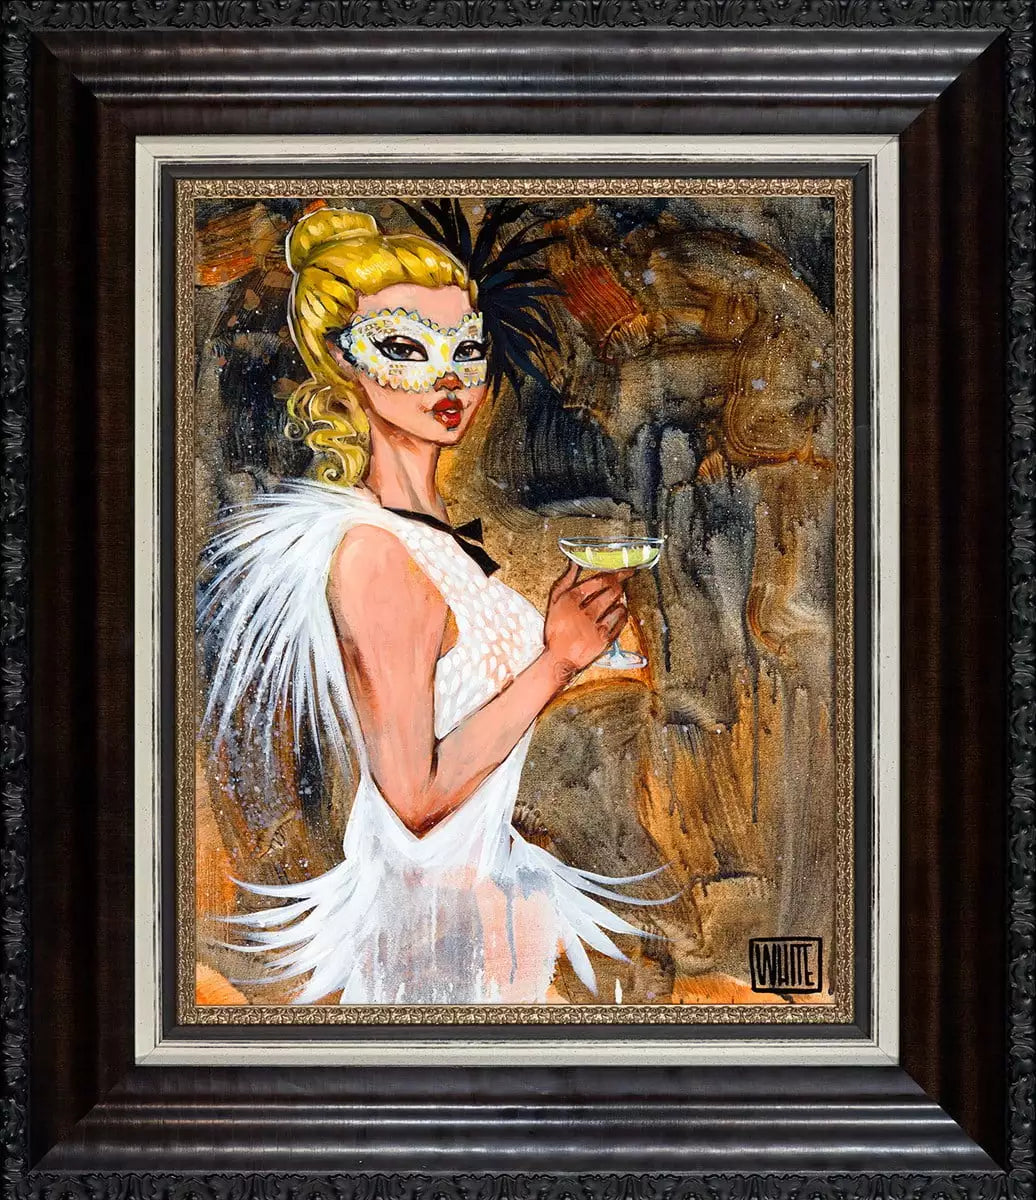 Todd White "Black Tie Optional" Limited Edition Canvas Giclee